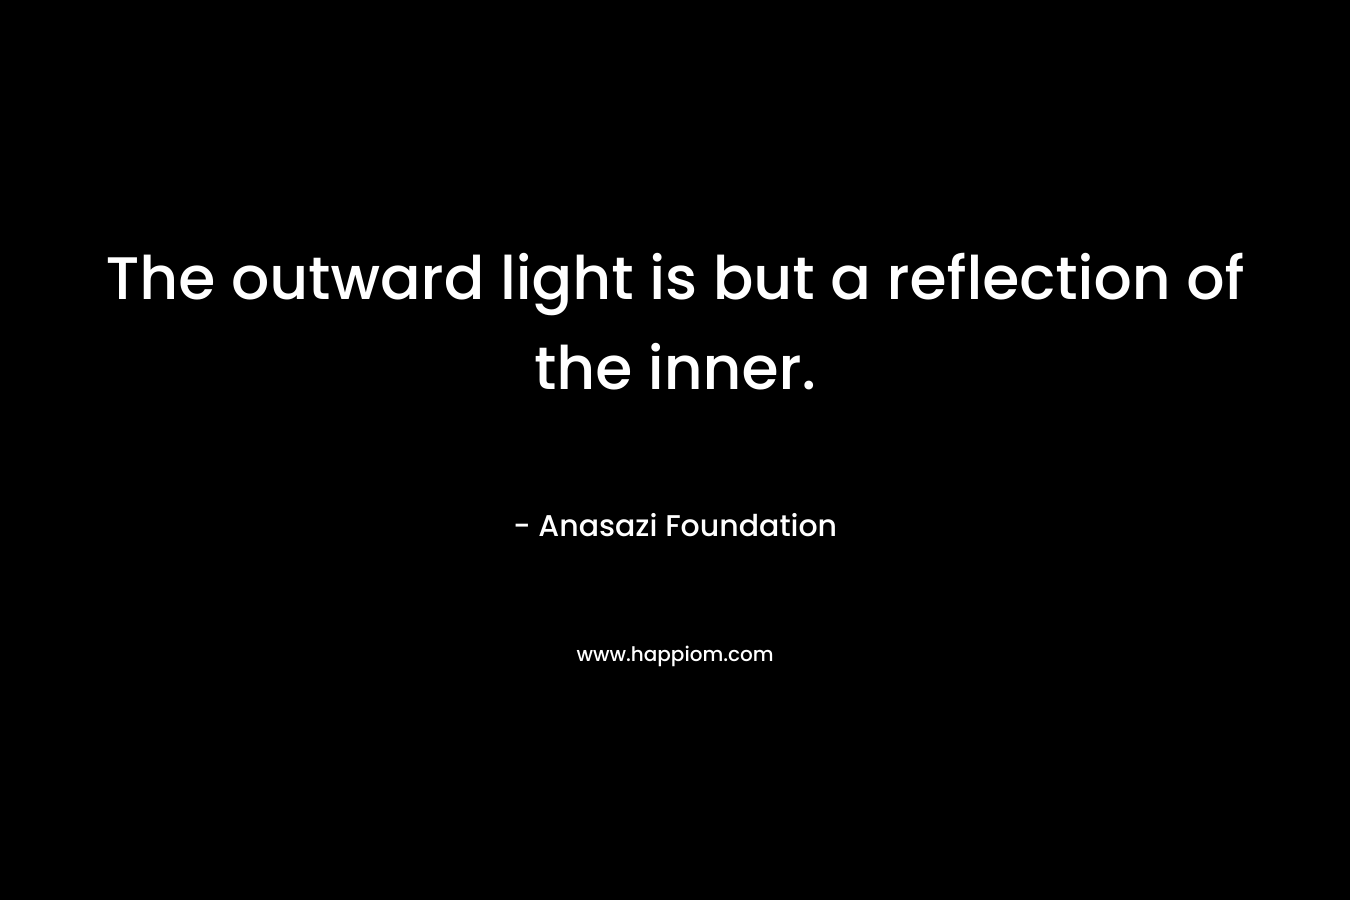 The outward light is but a reflection of the inner.